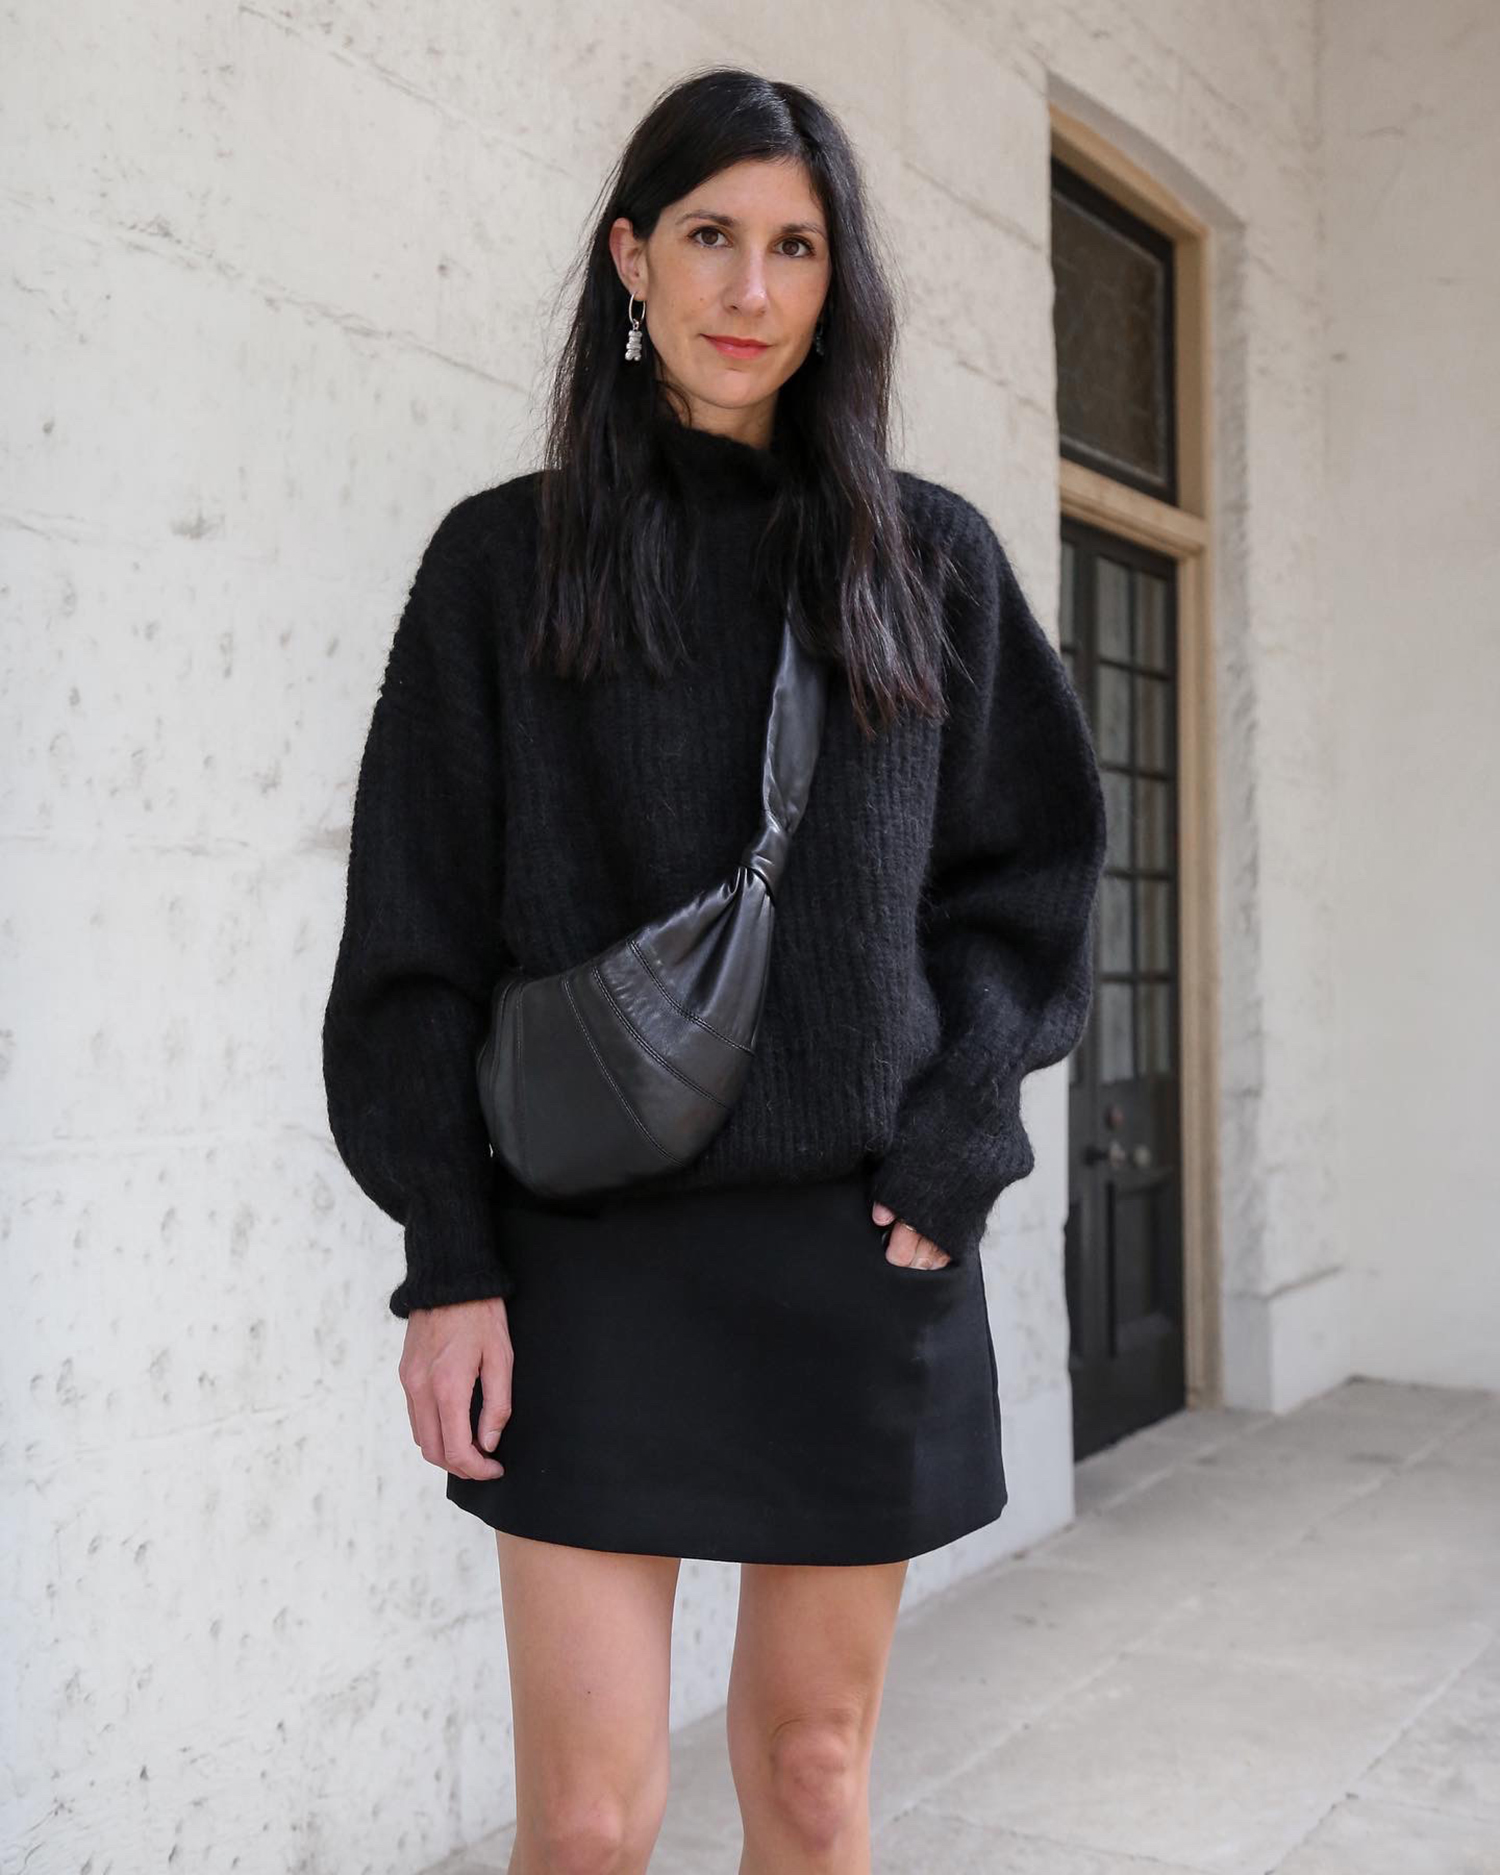 Mademoiselle | A Minimal Style Fashion Blog | Page 7 of 312